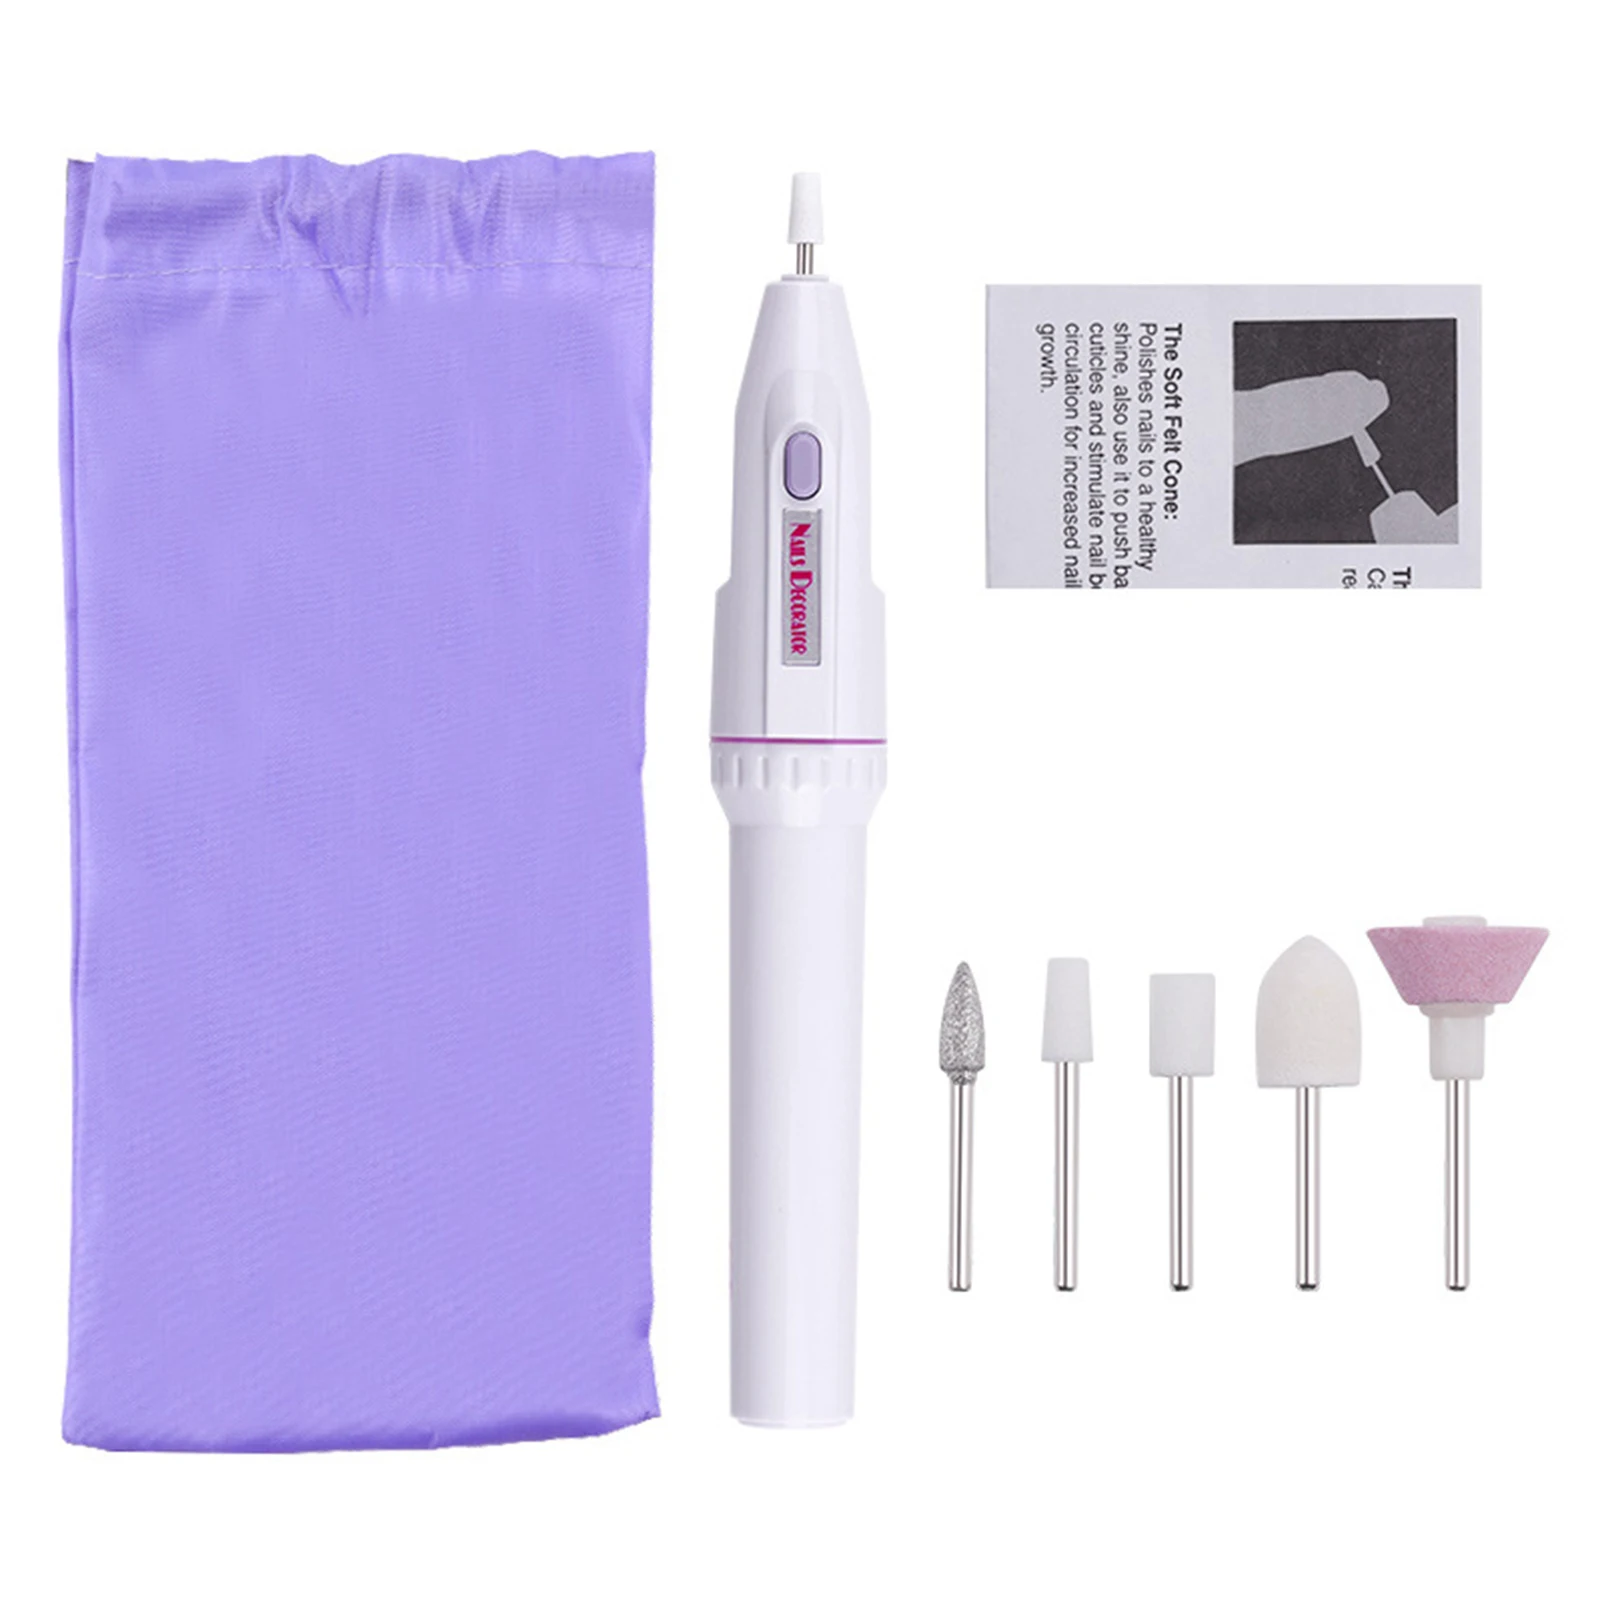 Machine Electric Nail File Gel Polish Remover Home Salon Gifts Drilling Pedicure Tool Mini Portable Low Noise Accessories